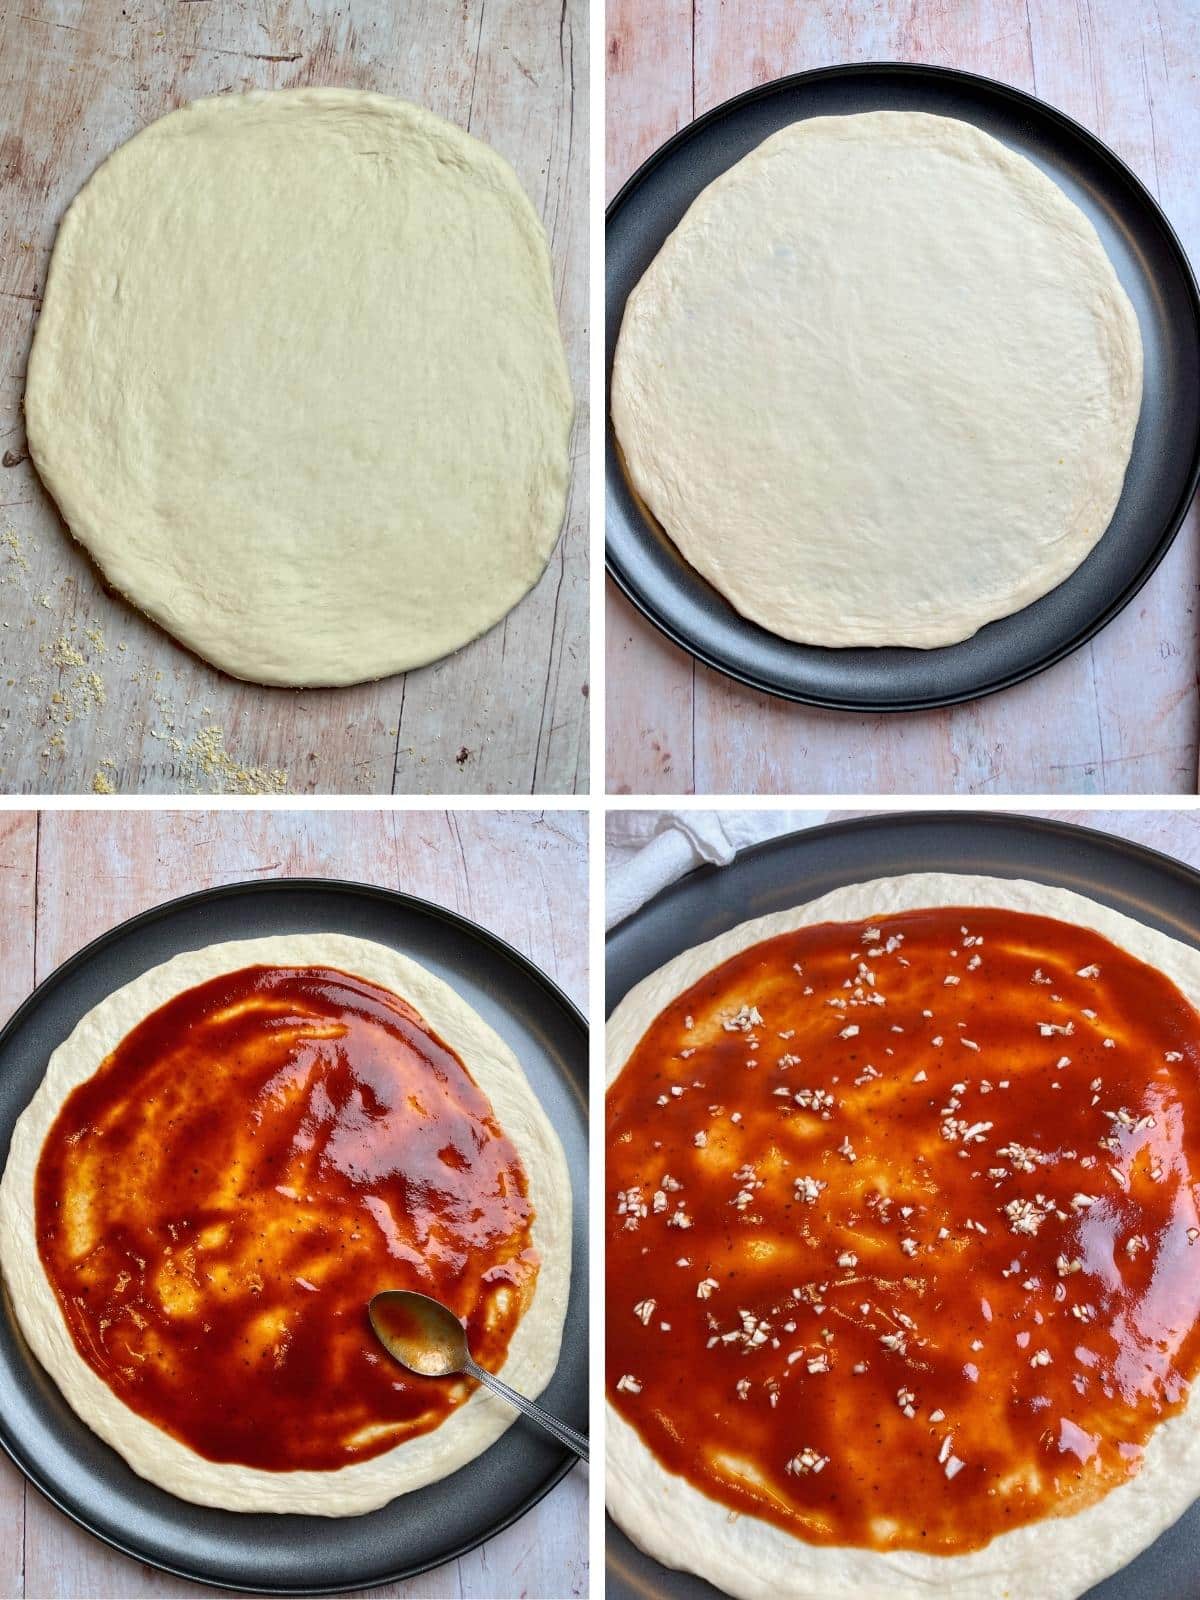 Barbecue pizza dough and sauce steps.